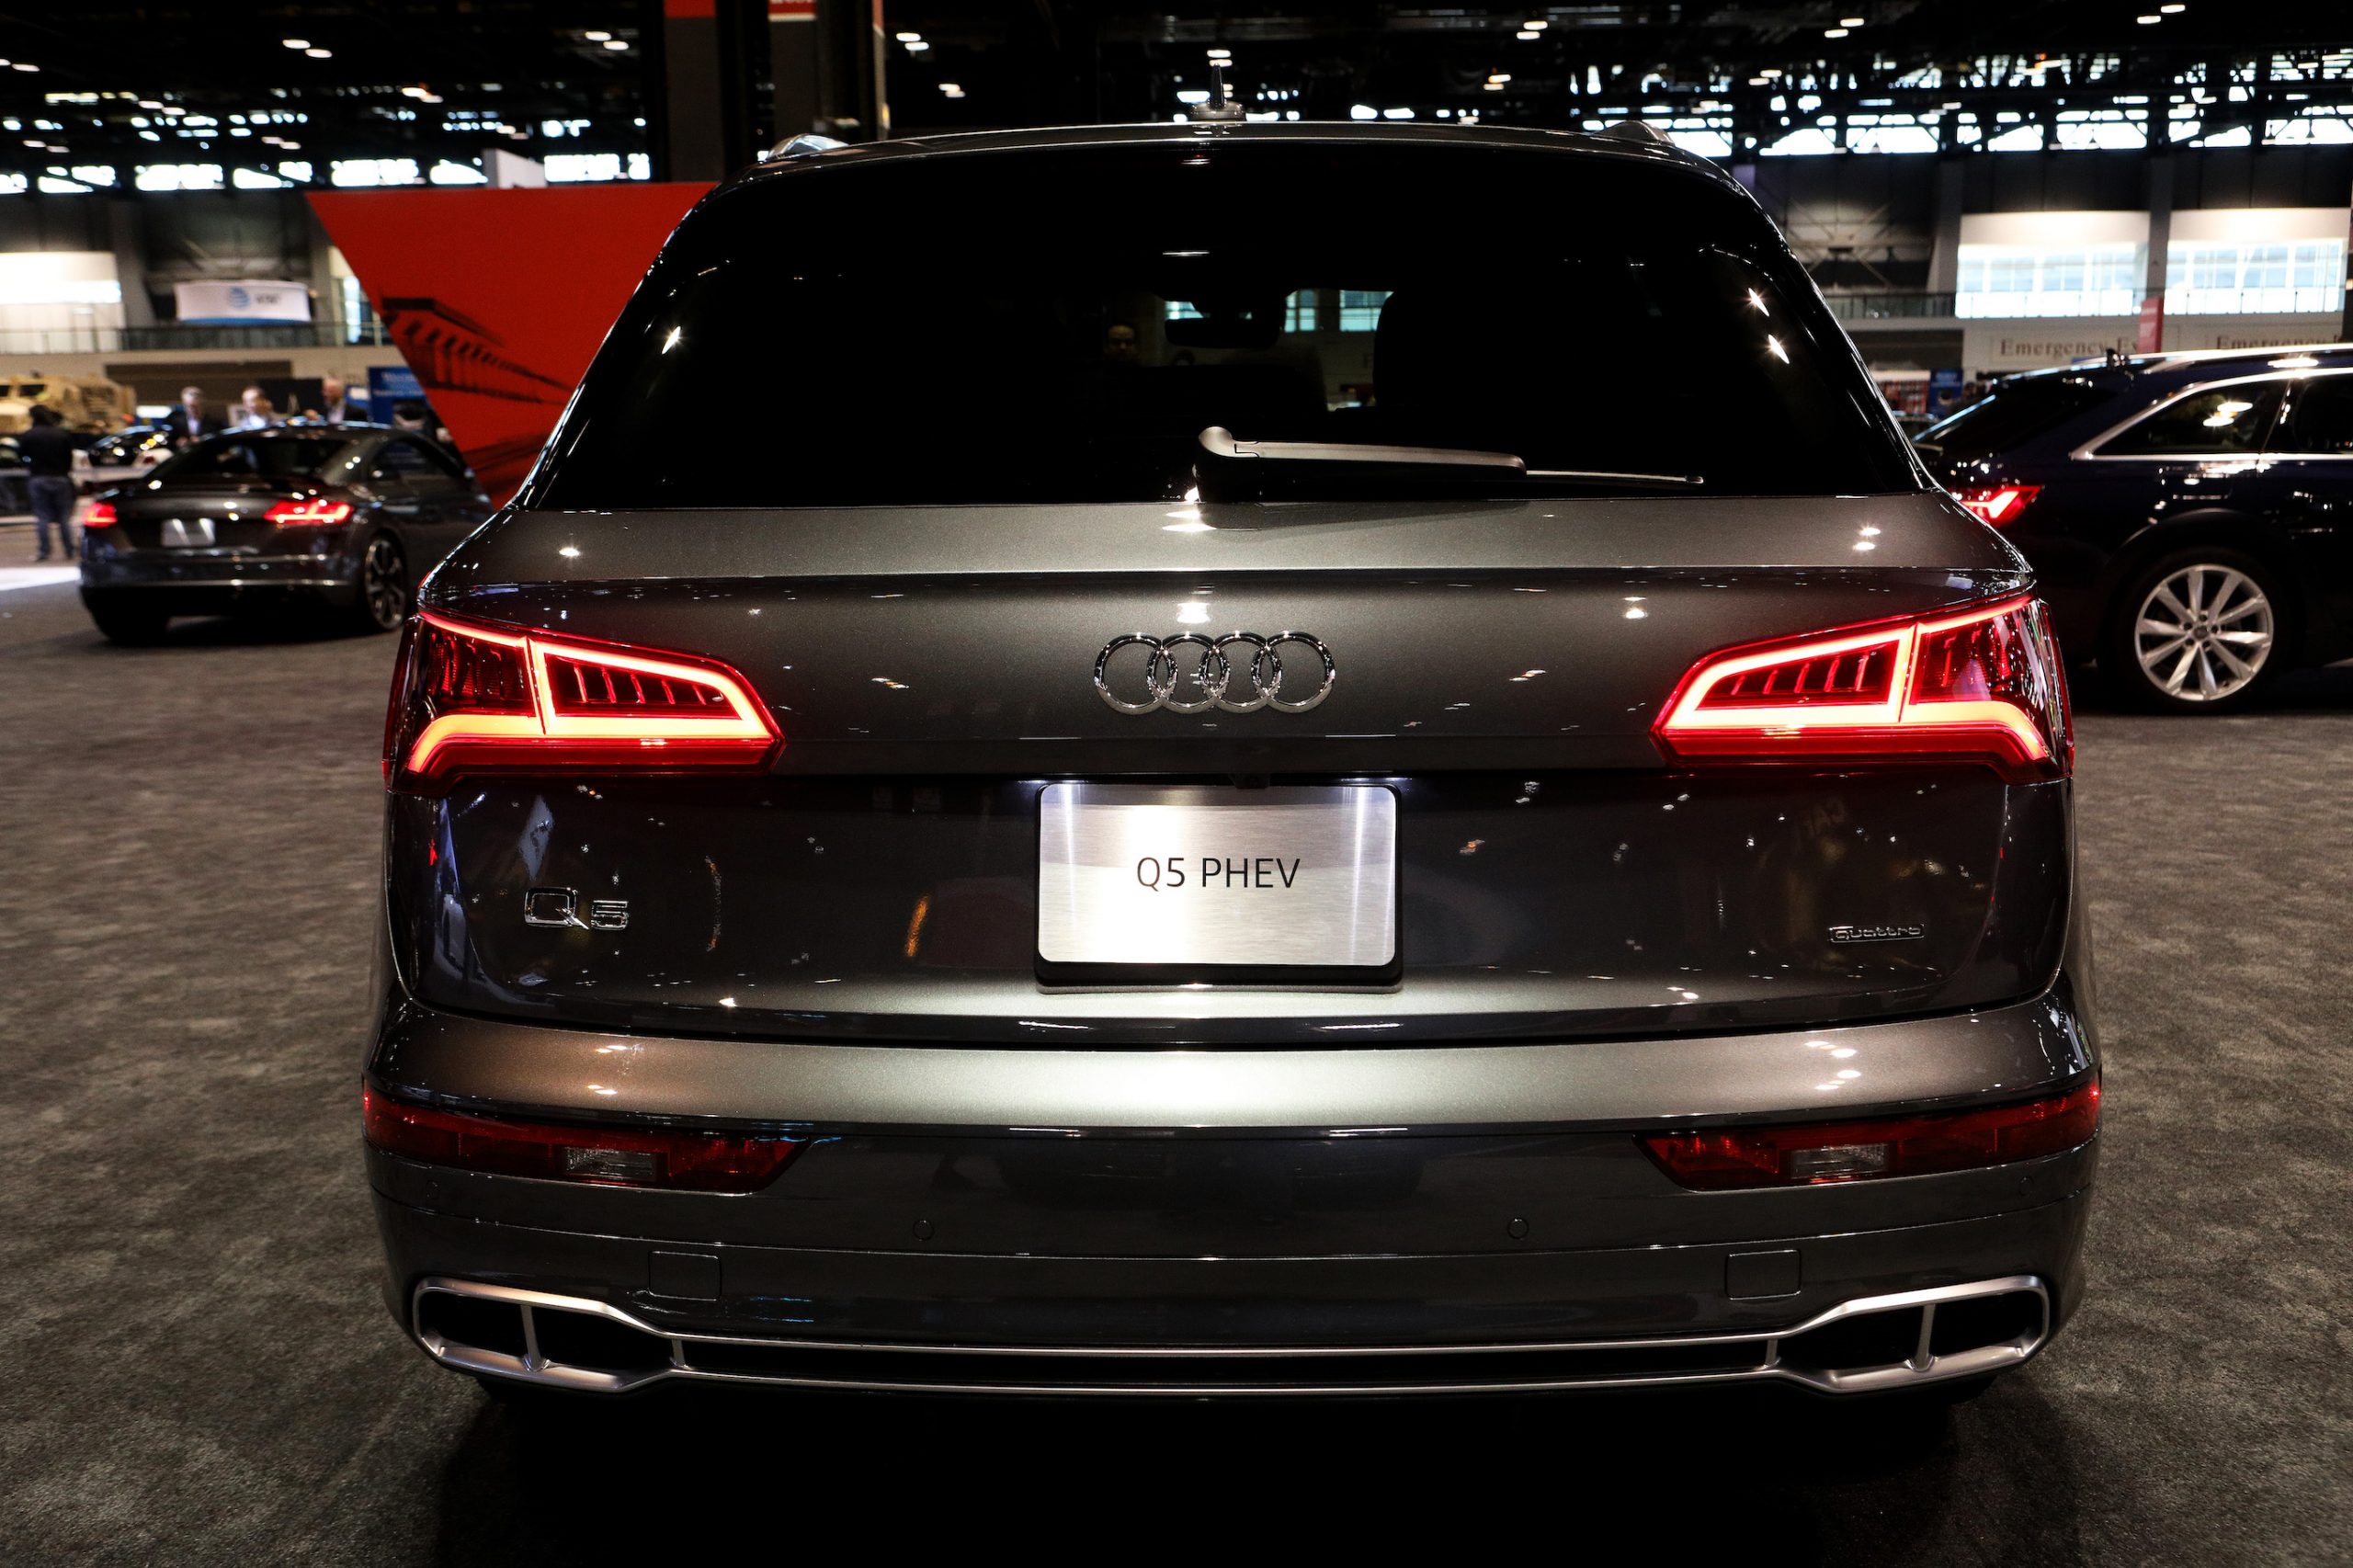 2020 Audi Q5 Phev is on display at the 112th Annual Chicago Auto Show